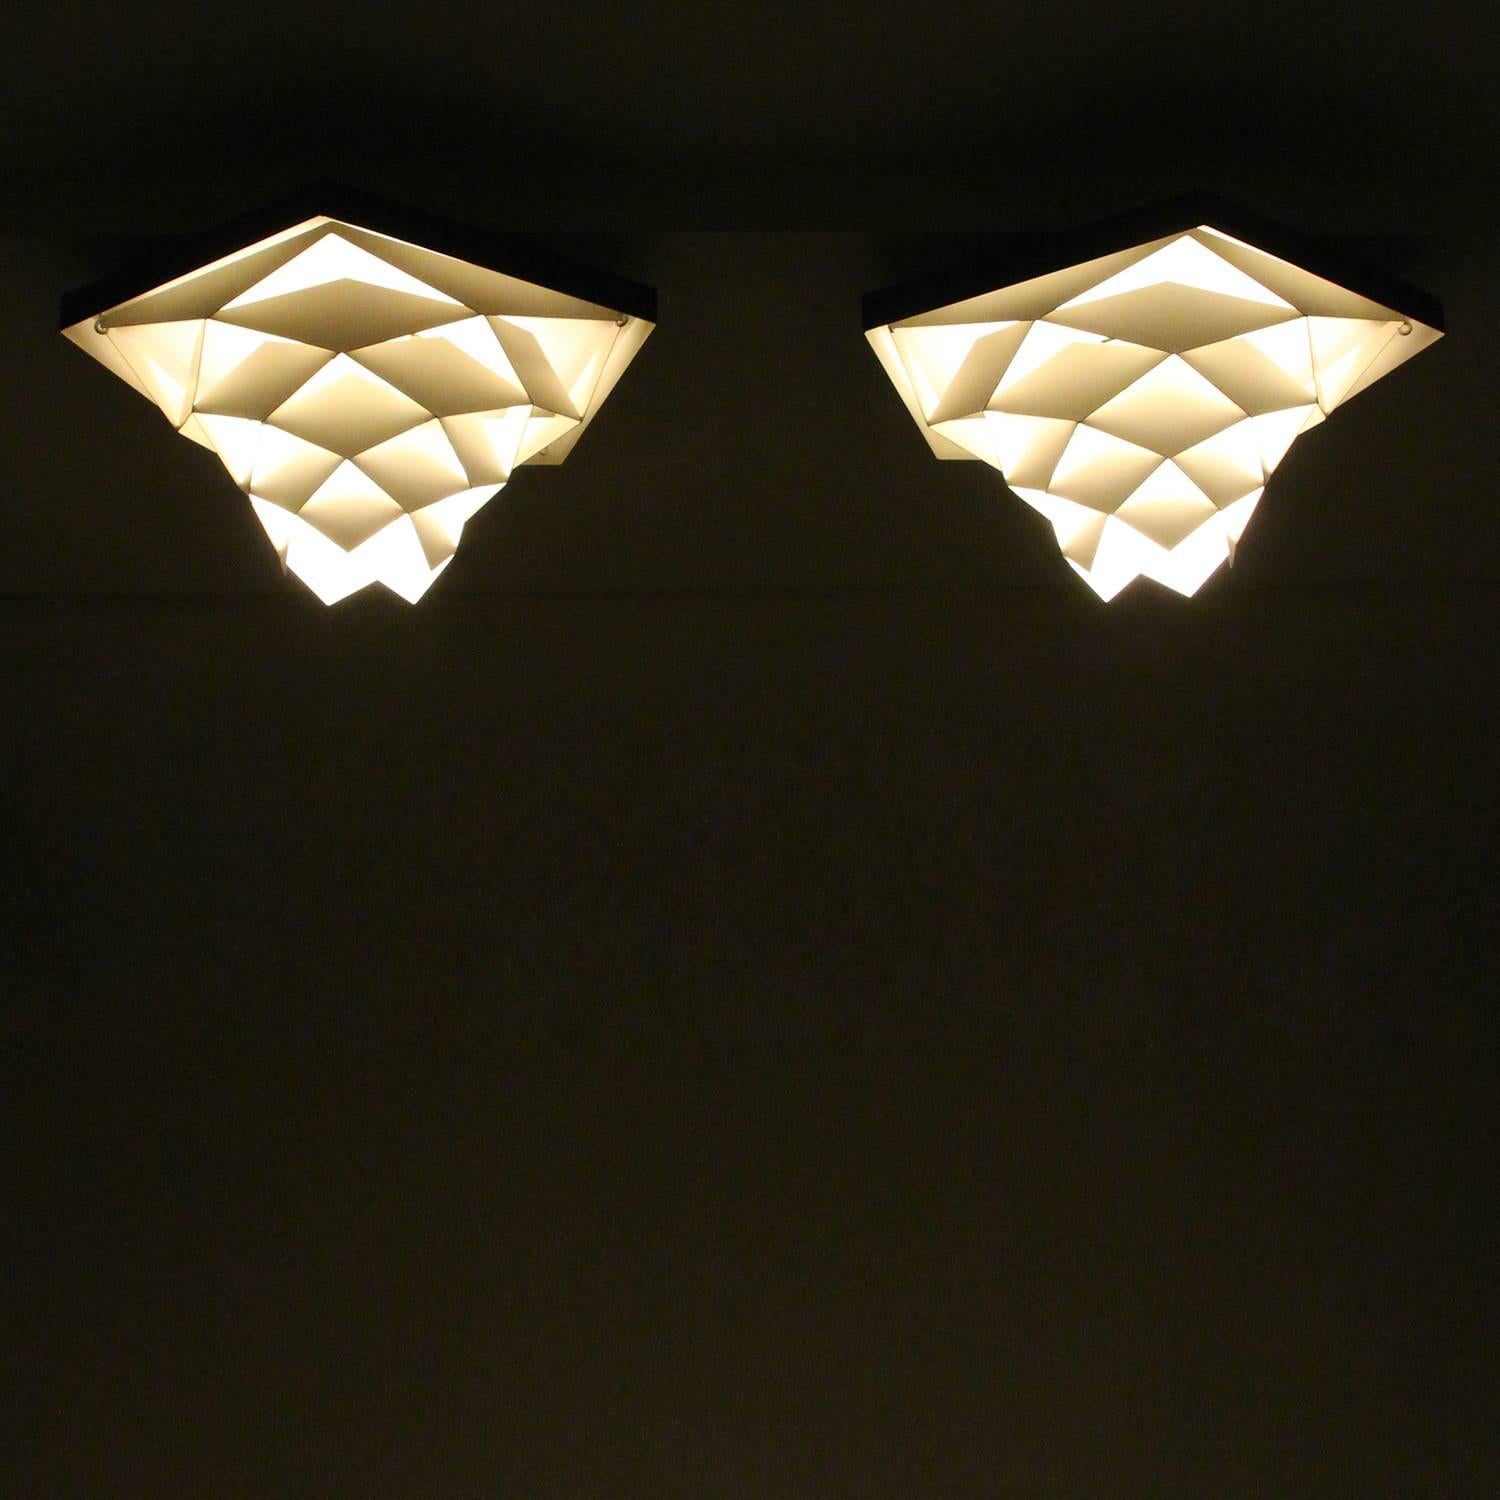 Symfoni Flush, pair of ceiling flush lights by Preben Dal in the early 1960s and produced by H. Følsgaard Elektro - extremely rare pair of Danish white and grey ceiling flush lights in very good vintage condition!

A pair of enchanting